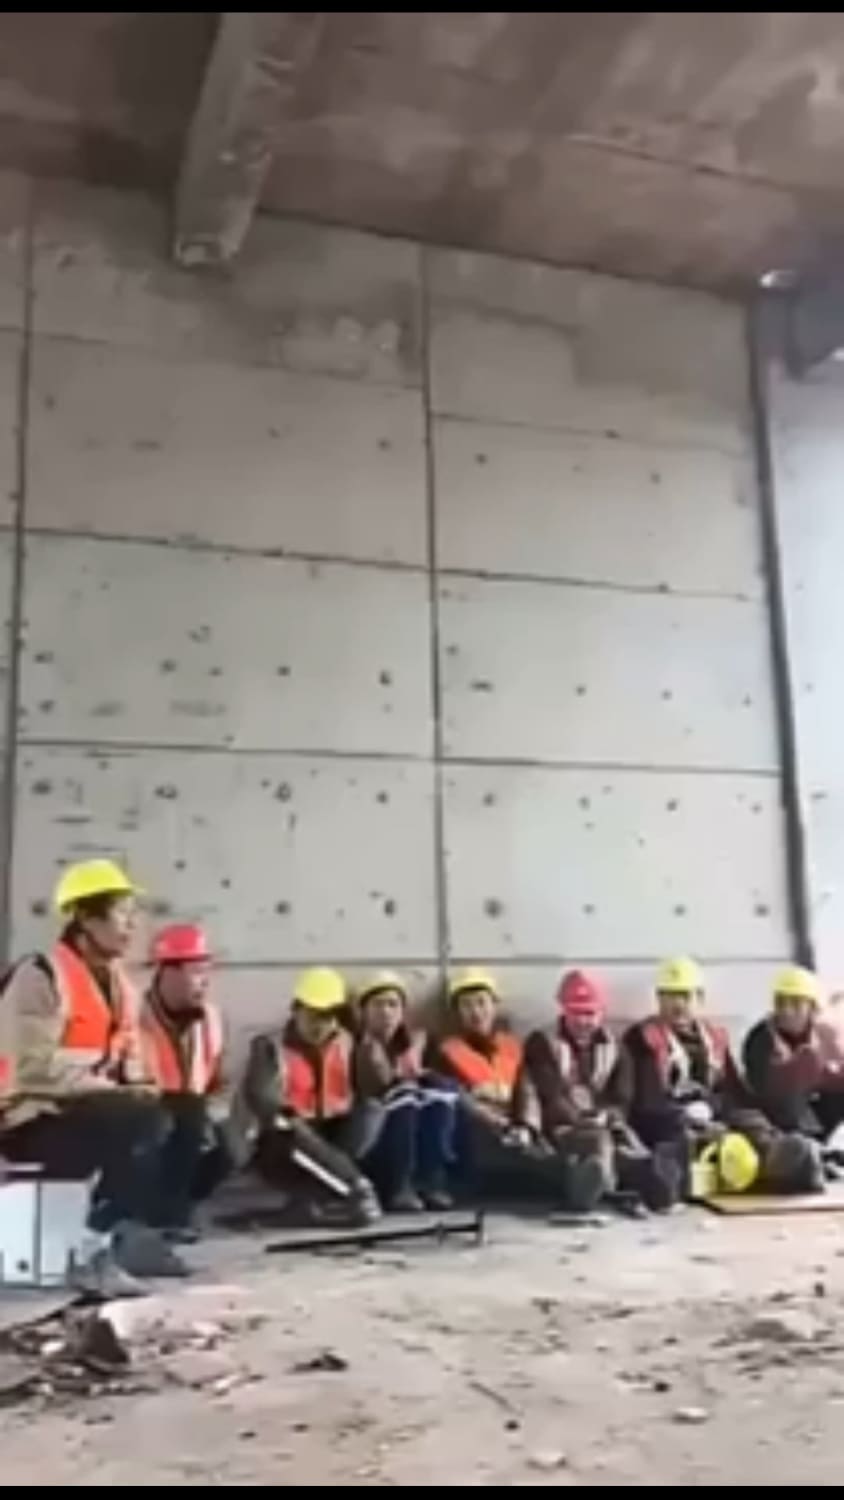 Let's remember the legendary dance of Michael Jackson by a Chinese construction worker